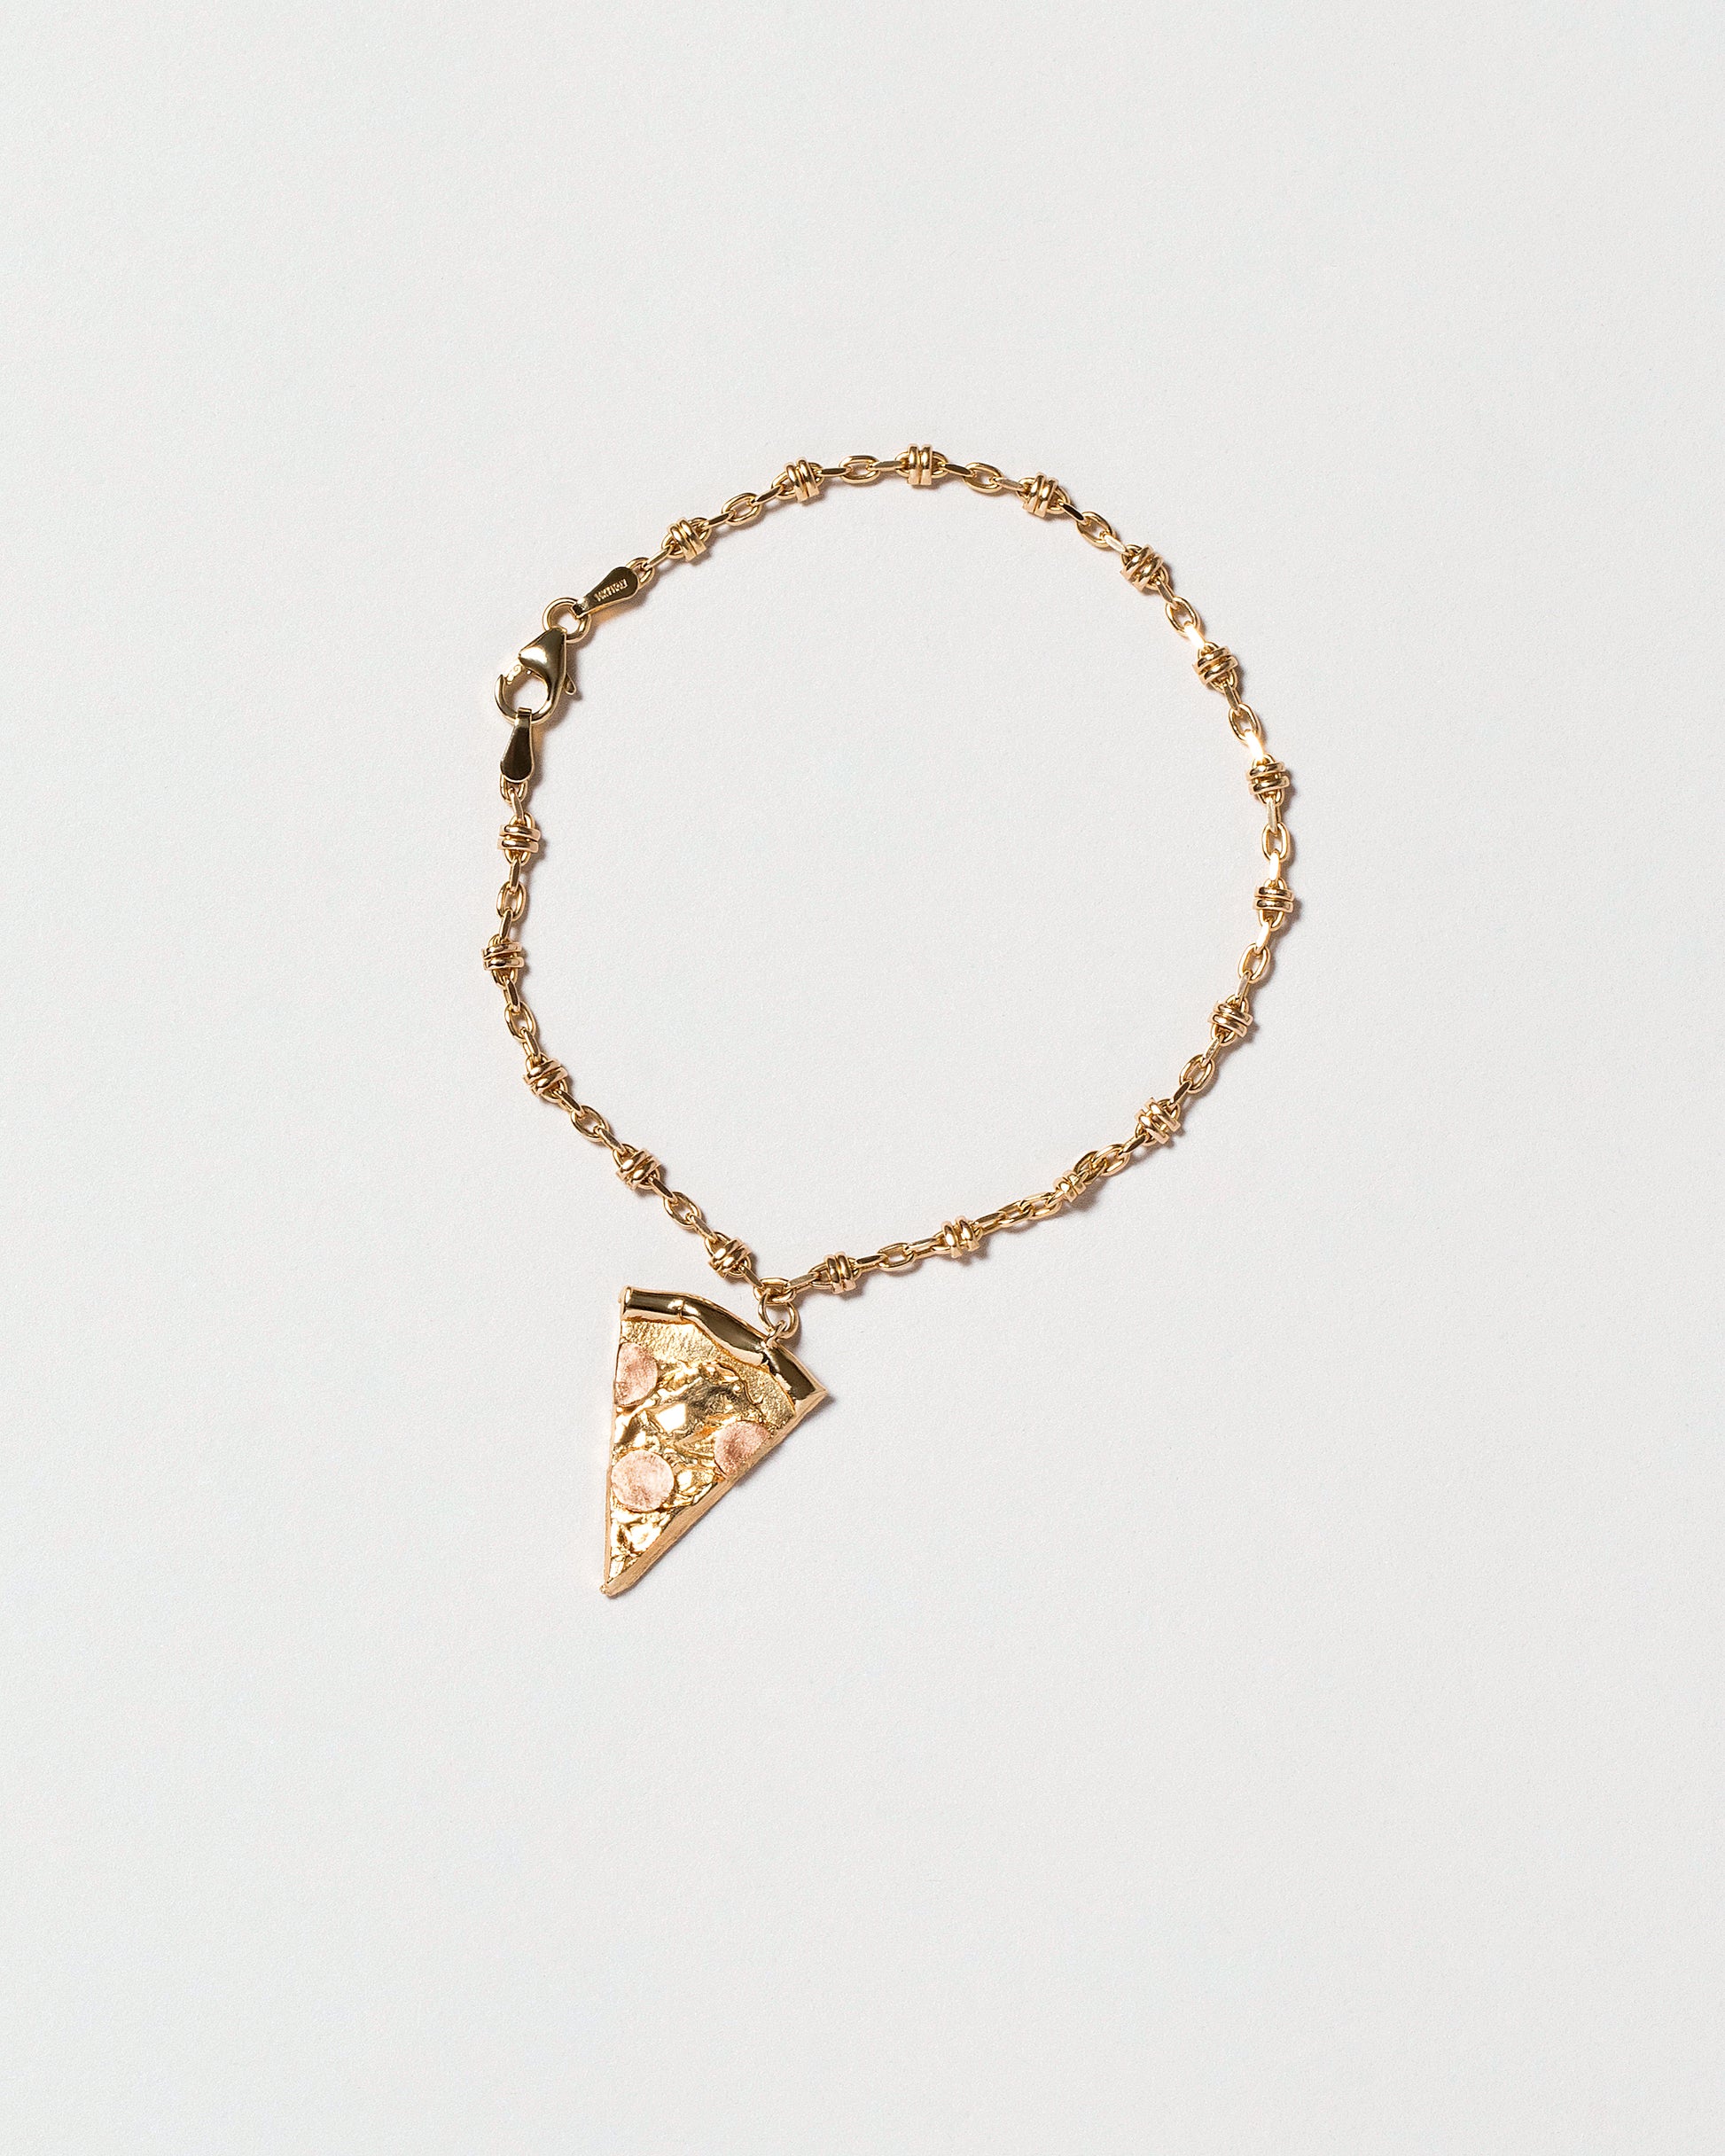 Wrapped Chain Bracelet with Pizza Slice charm on light color background.